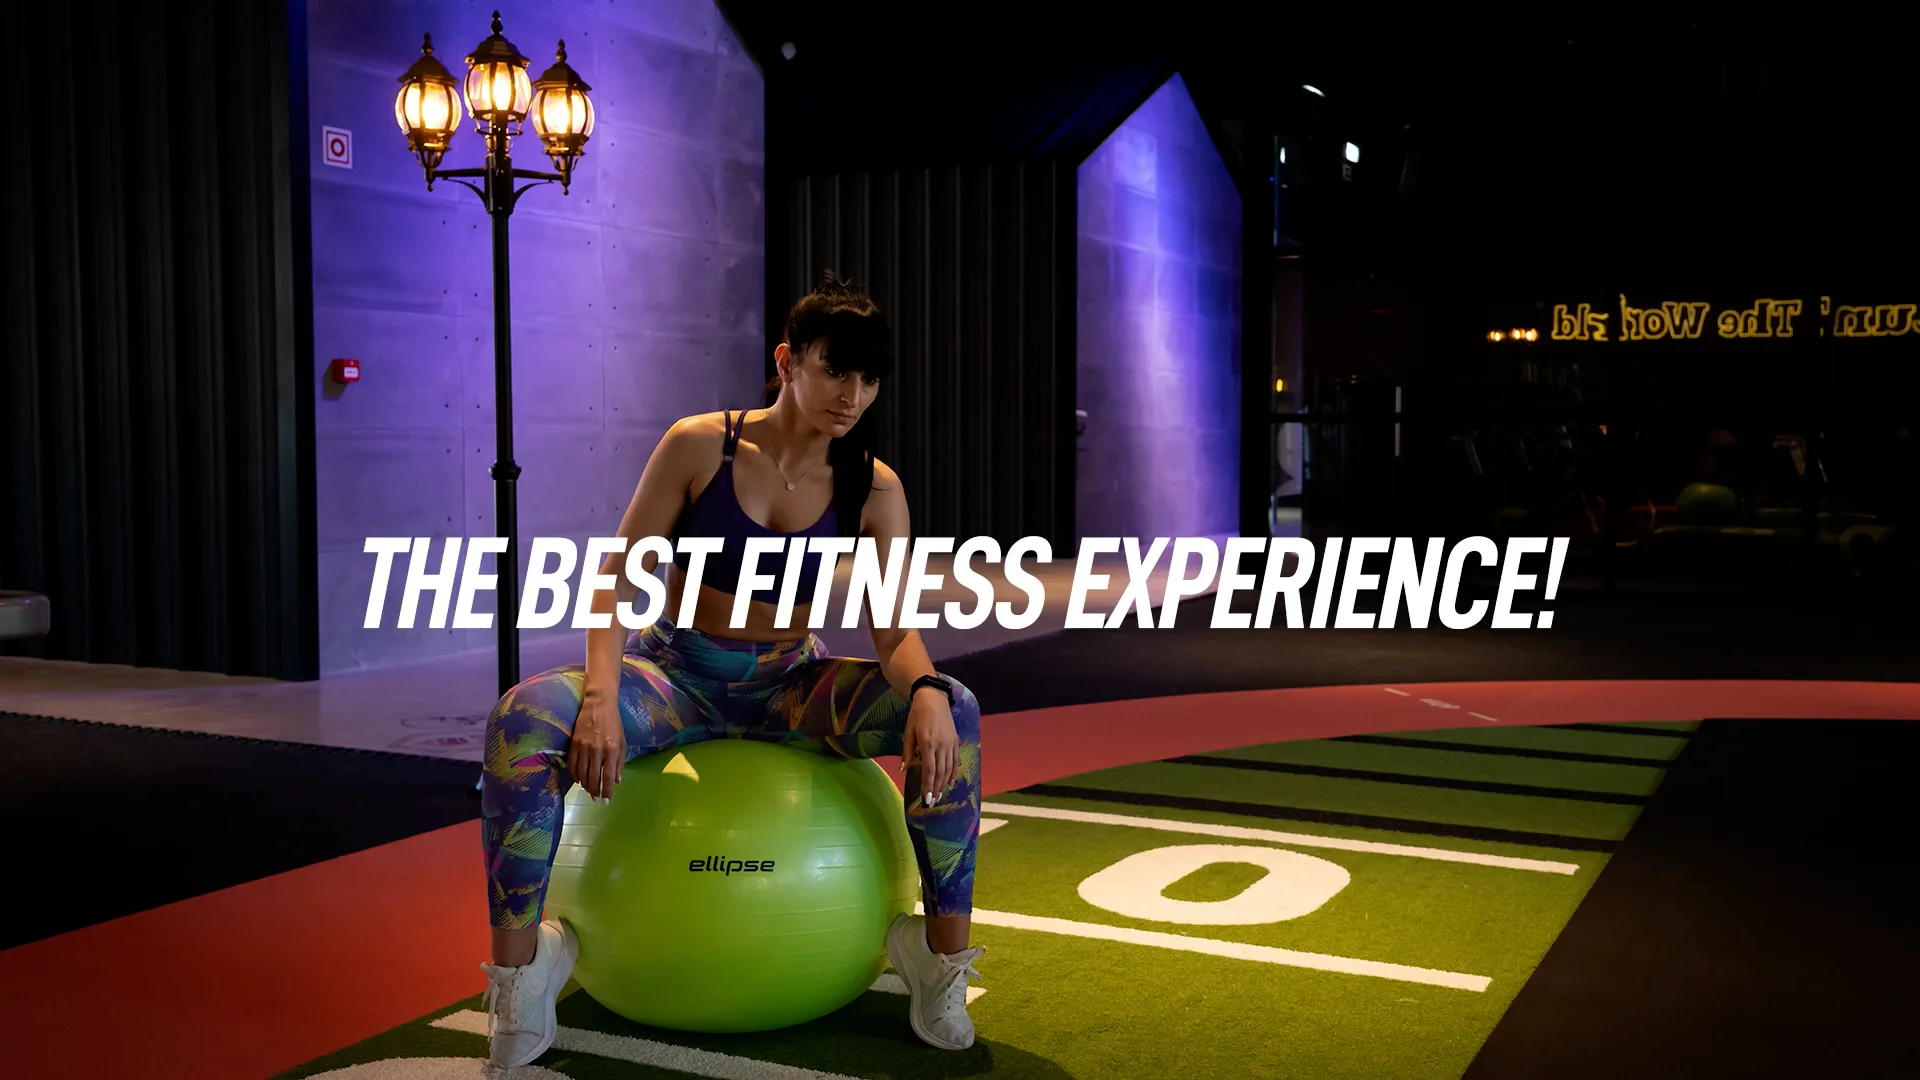 Videos in PRIME FITNESS U.S.A. on Vimeo